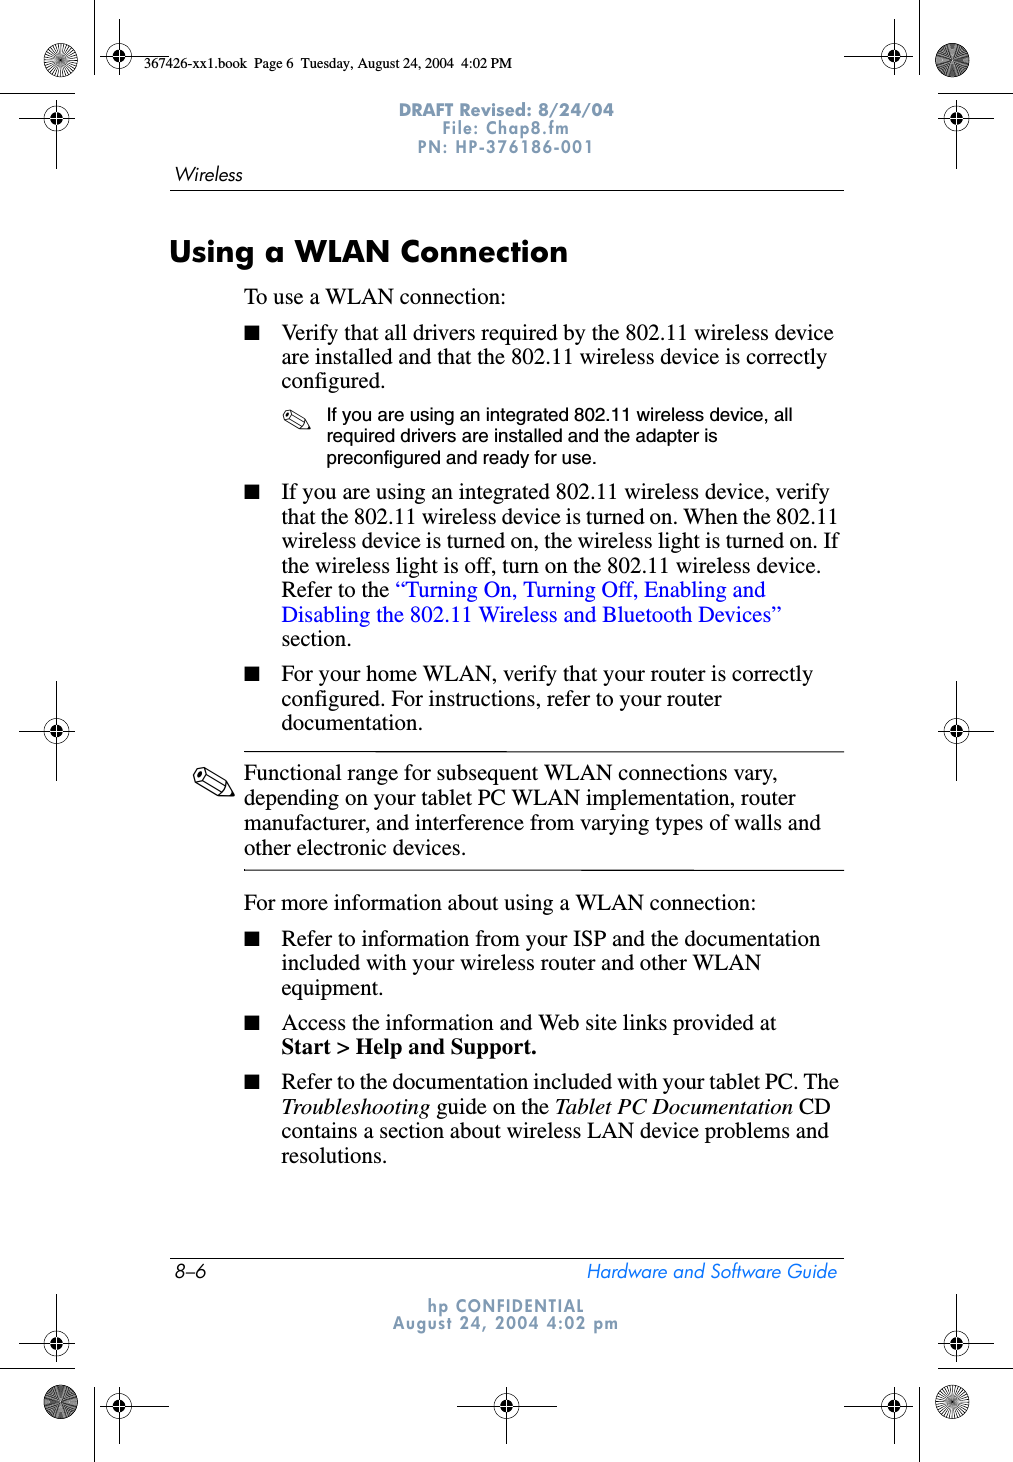 8–6 Hardware and Software GuideWirelessDRAFT Revised: 8/24/04File: Chap8.fm PN: HP-376186-001 hp CONFIDENTIALAugust 24, 2004 4:02 pmUsing a WLAN ConnectionTo use a WLAN connection:■Verify that all drivers required by the 802.11 wireless device are installed and that the 802.11 wireless device is correctly configured. ✎If you are using an integrated 802.11 wireless device, all required drivers are installed and the adapter is preconfigured and ready for use.■If you are using an integrated 802.11 wireless device, verify that the 802.11 wireless device is turned on. When the 802.11 wireless device is turned on, the wireless light is turned on. If the wireless light is off, turn on the 802.11 wireless device. Refer to the “Turning On, Turning Off, Enabling and Disabling the 802.11 Wireless and Bluetooth Devices” section.■For your home WLAN, verify that your router is correctly configured. For instructions, refer to your router documentation.✎Functional range for subsequent WLAN connections vary, depending on your tablet PC WLAN implementation, router manufacturer, and interference from varying types of walls and other electronic devices.For more information about using a WLAN connection:■Refer to information from your ISP and the documentation included with your wireless router and other WLAN equipment. ■Access the information and Web site links provided at Start &gt; Help and Support.■Refer to the documentation included with your tablet PC. The Troubleshooting guide on the Tablet PC Documentation CD contains a section about wireless LAN device problems and resolutions.367426-xx1.book  Page 6  Tuesday, August 24, 2004  4:02 PM